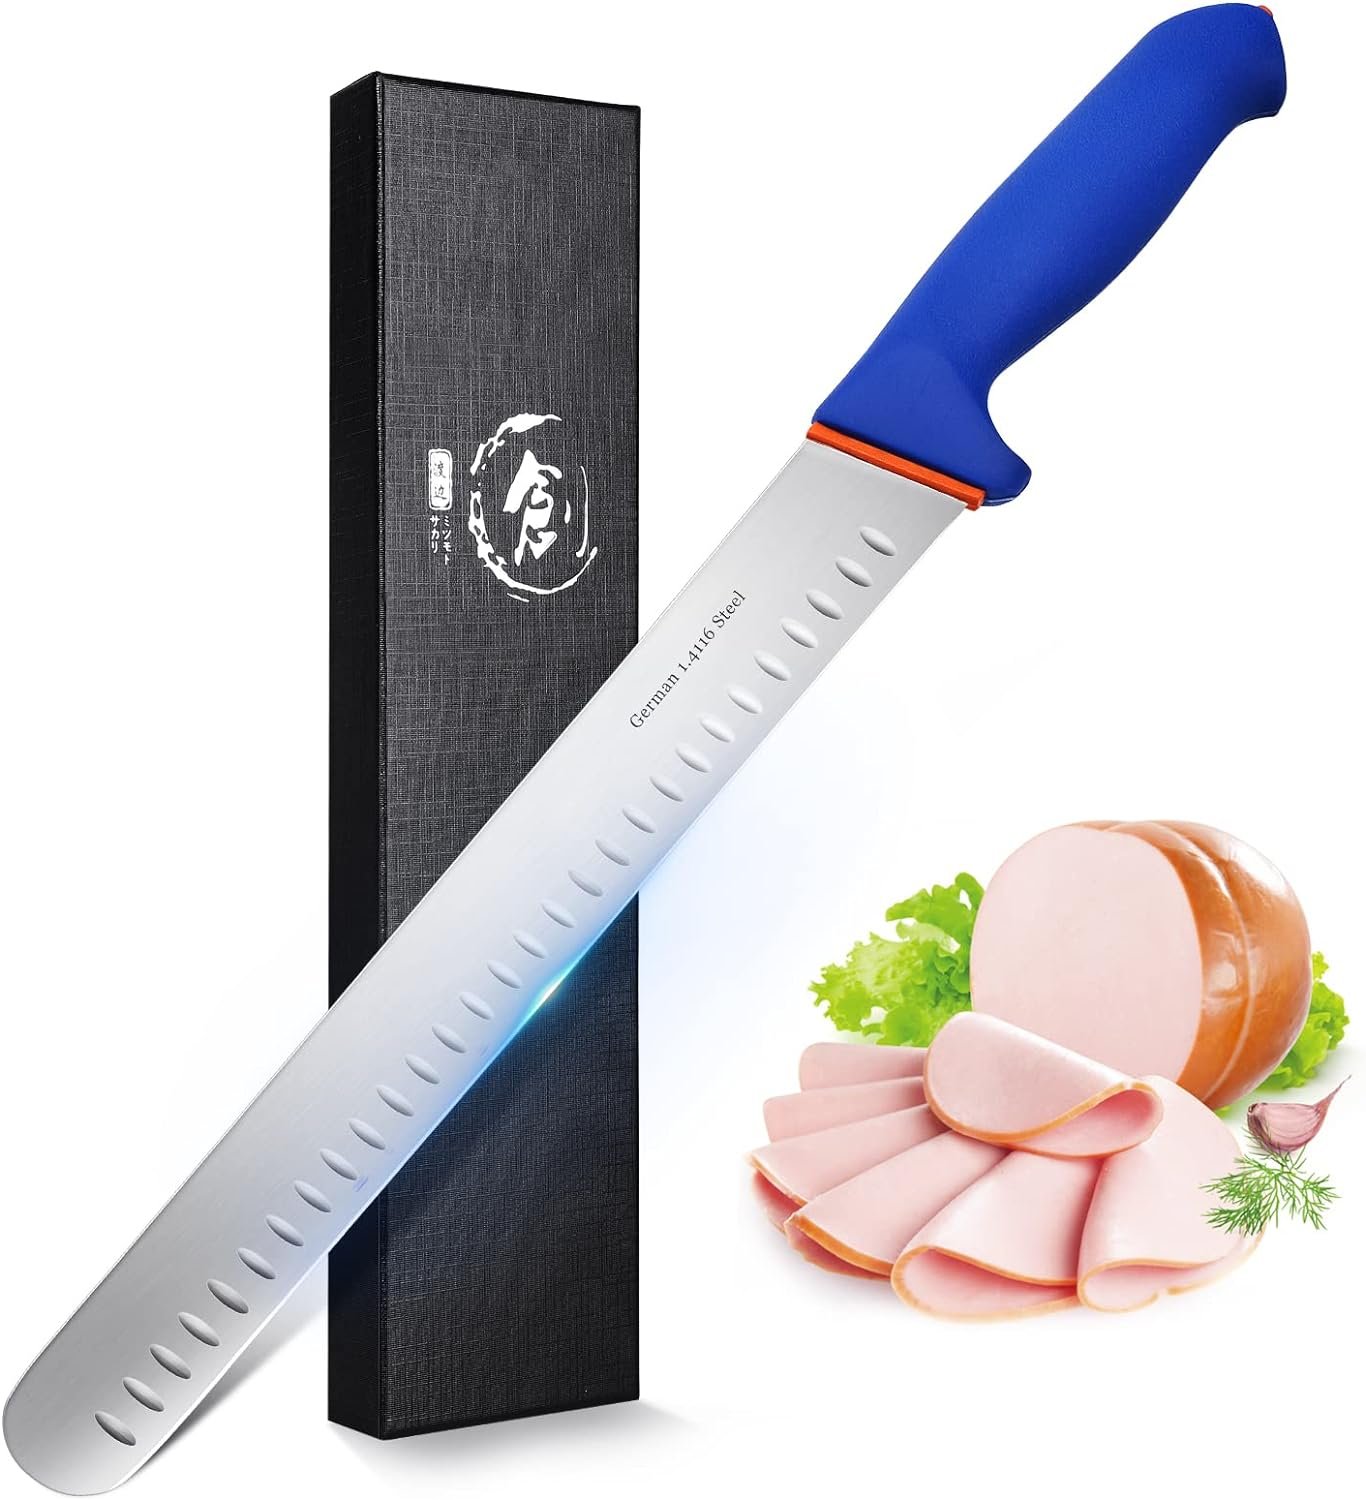 SpitJack BBQ Smoked Brisket Knife for Meat Carving and Slicing